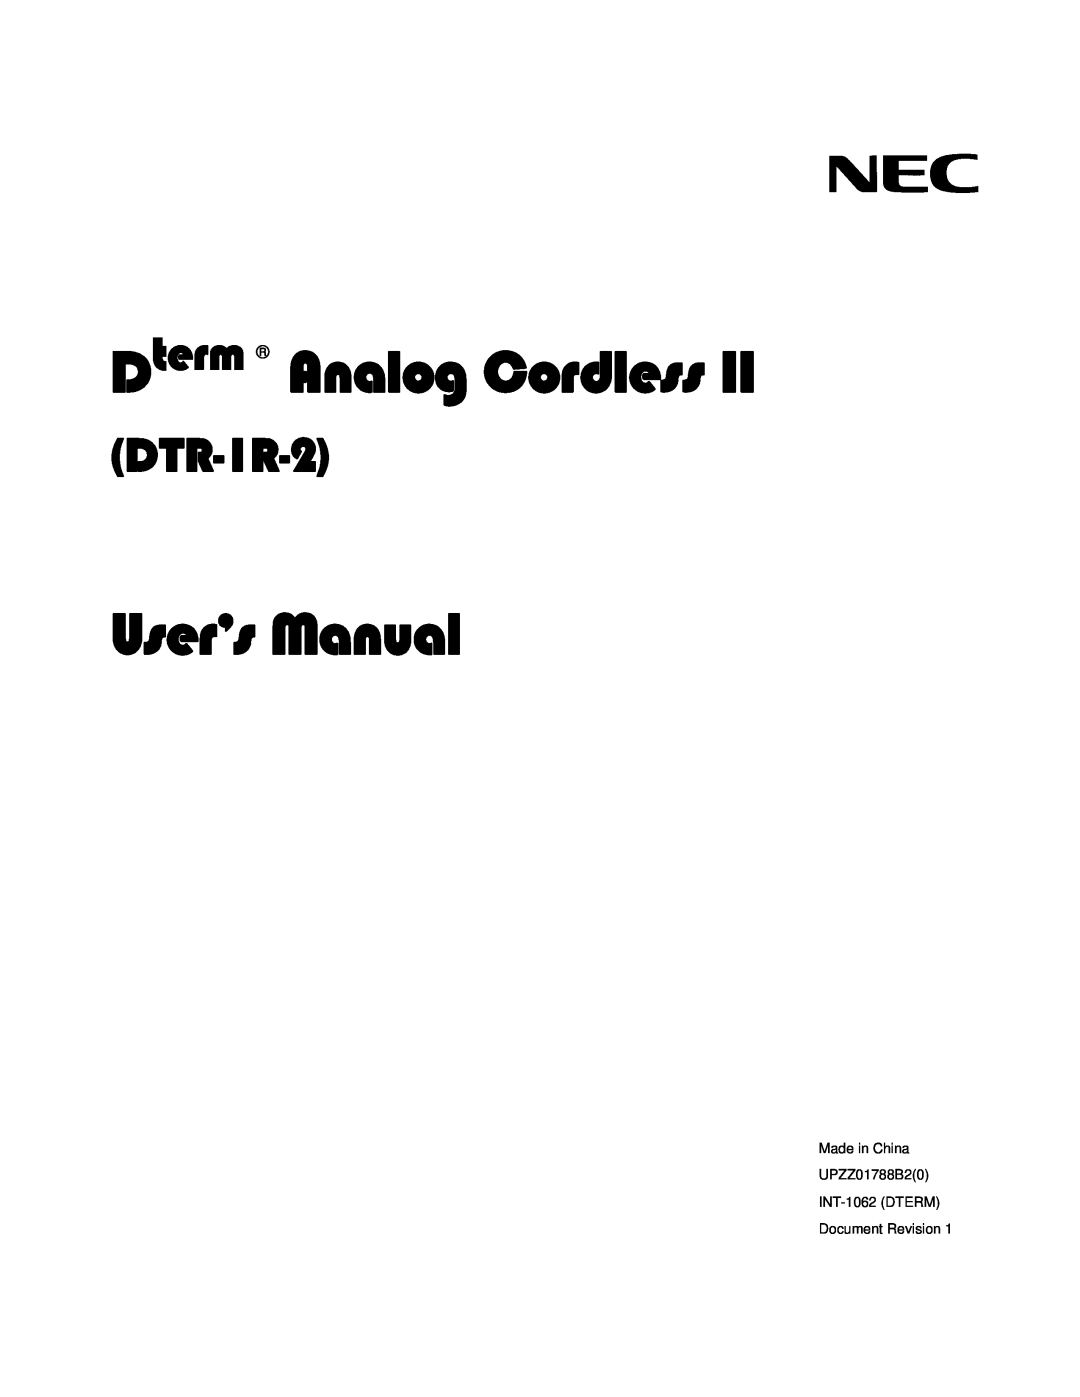 NEC DTR-IR-2 Dterm Analog Cordless, User’s Manual, DTR-1R-2, Made in China UPZZ01788B20 INT-1062 DTERM Document Revision 